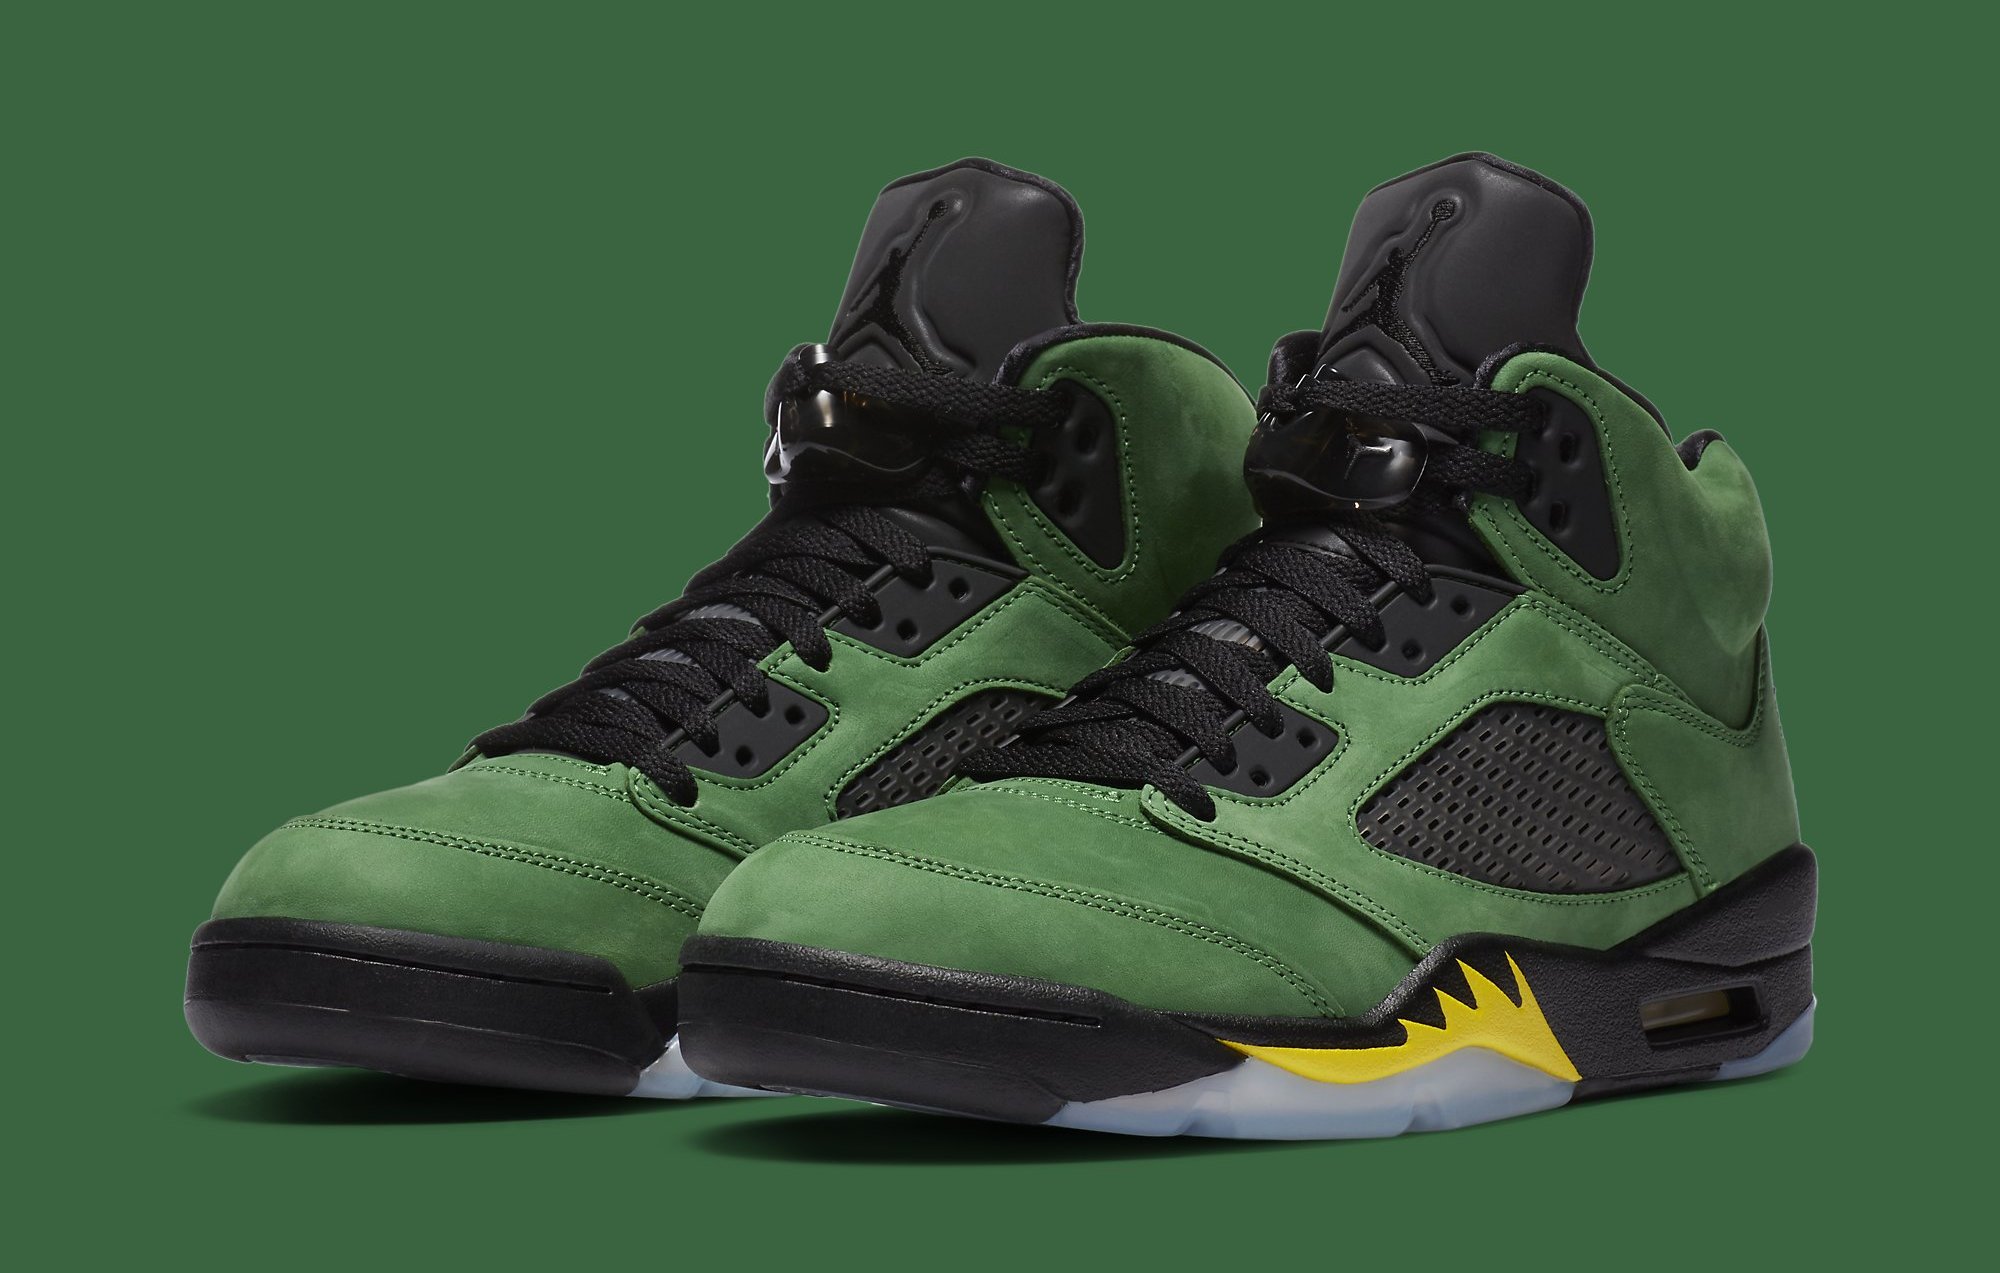 Best Look Yet at the 'Oregon' Air Jordan 5 Dropping Next Month